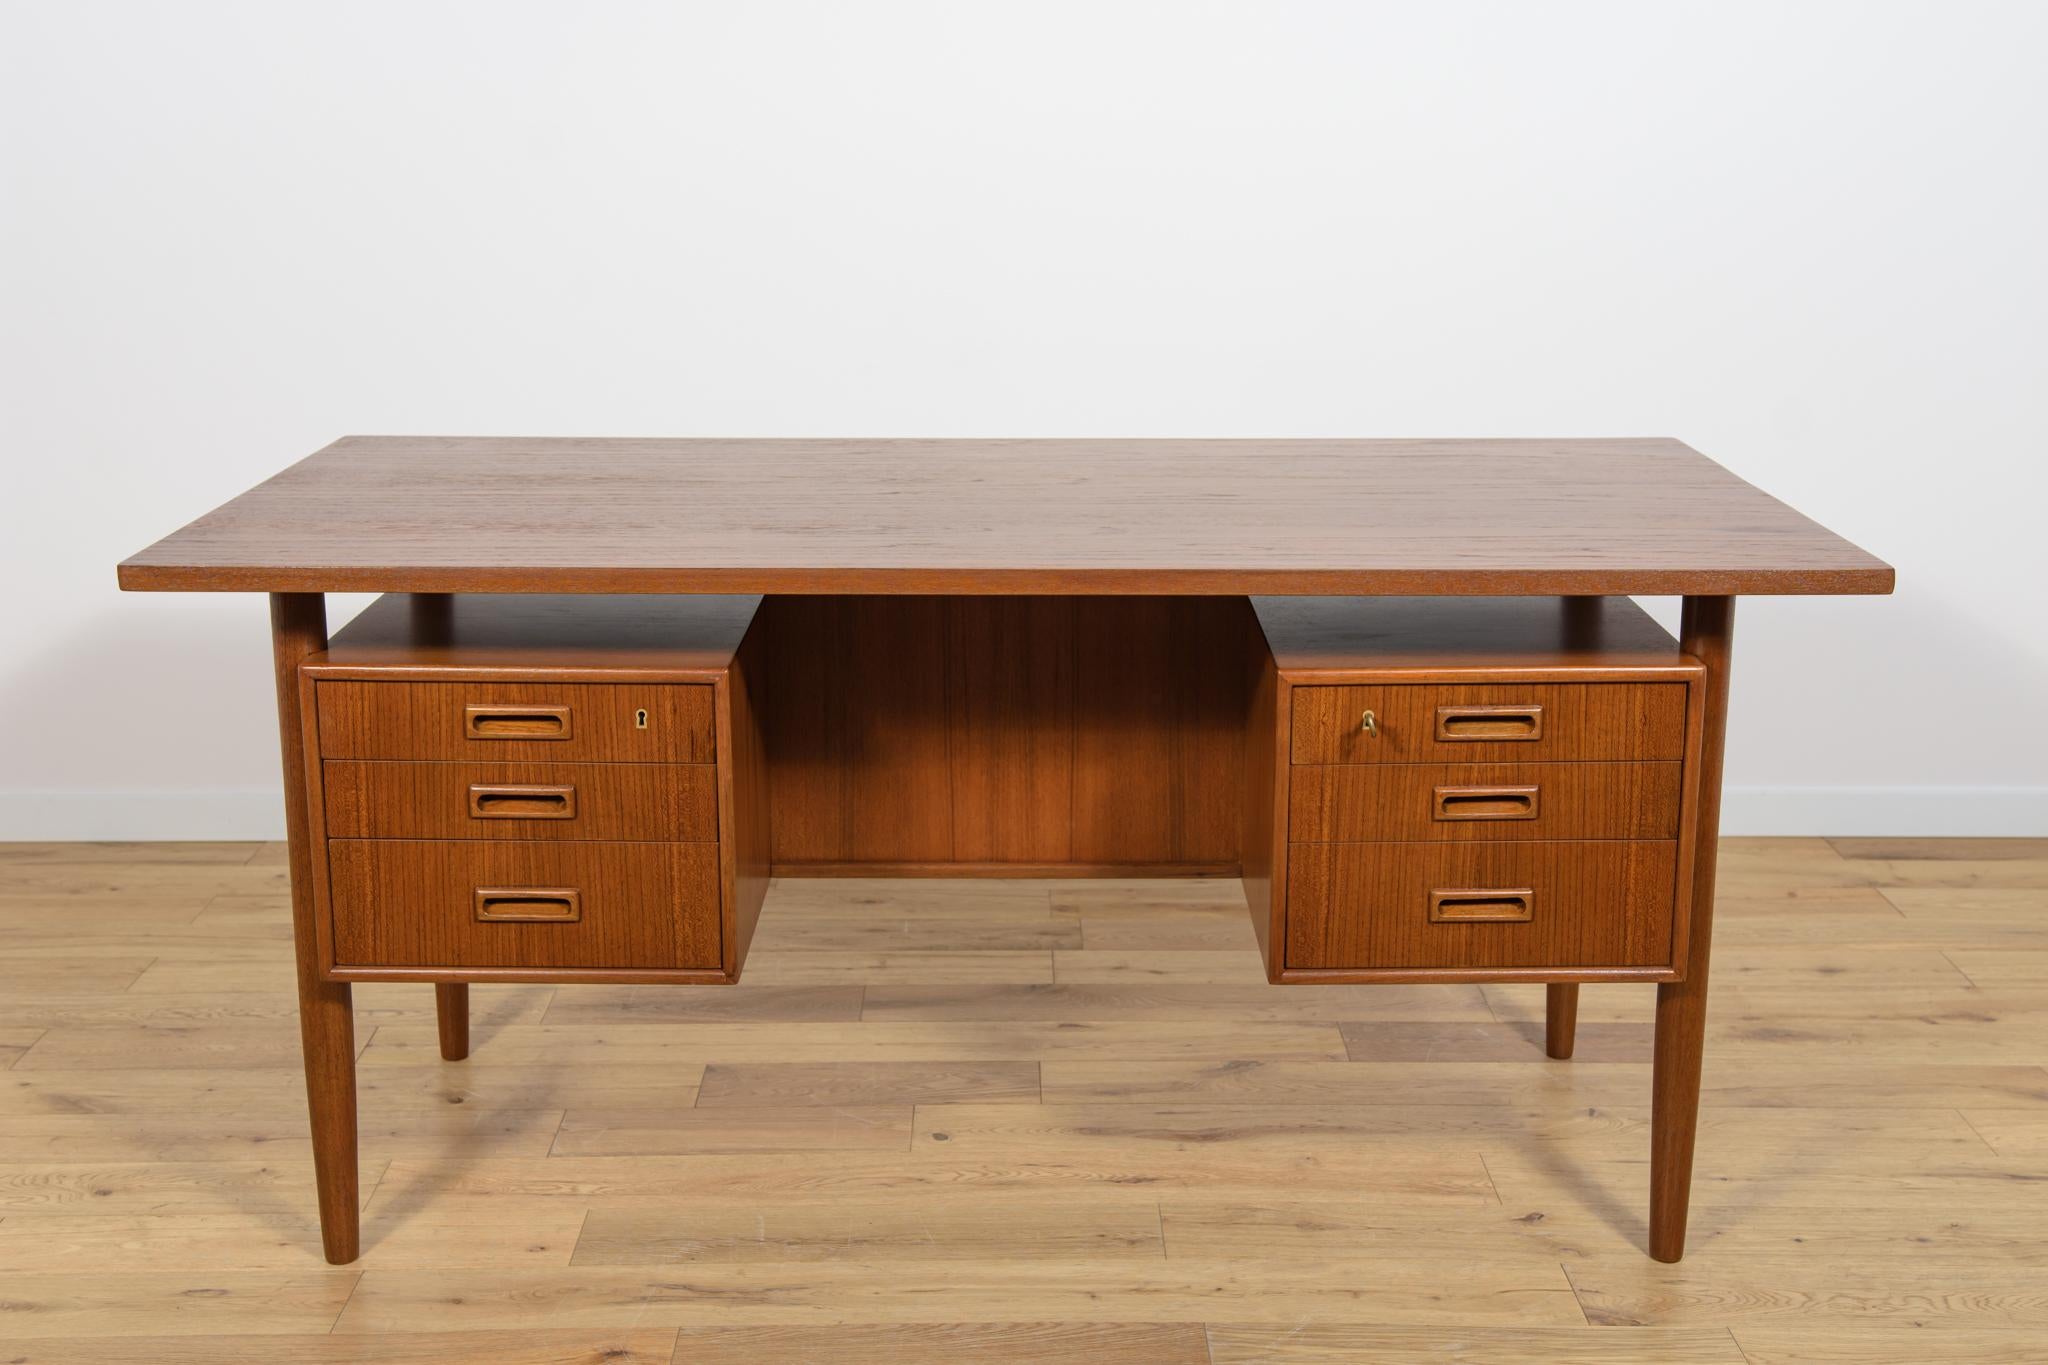 A desk designed by Danish designer Arne Vodder in the 1960s. The desk is made of teak wood and is free-standing thanks to the finished back with an open storage space. On the front there are two drawer modules with three drawers (two lockable). The